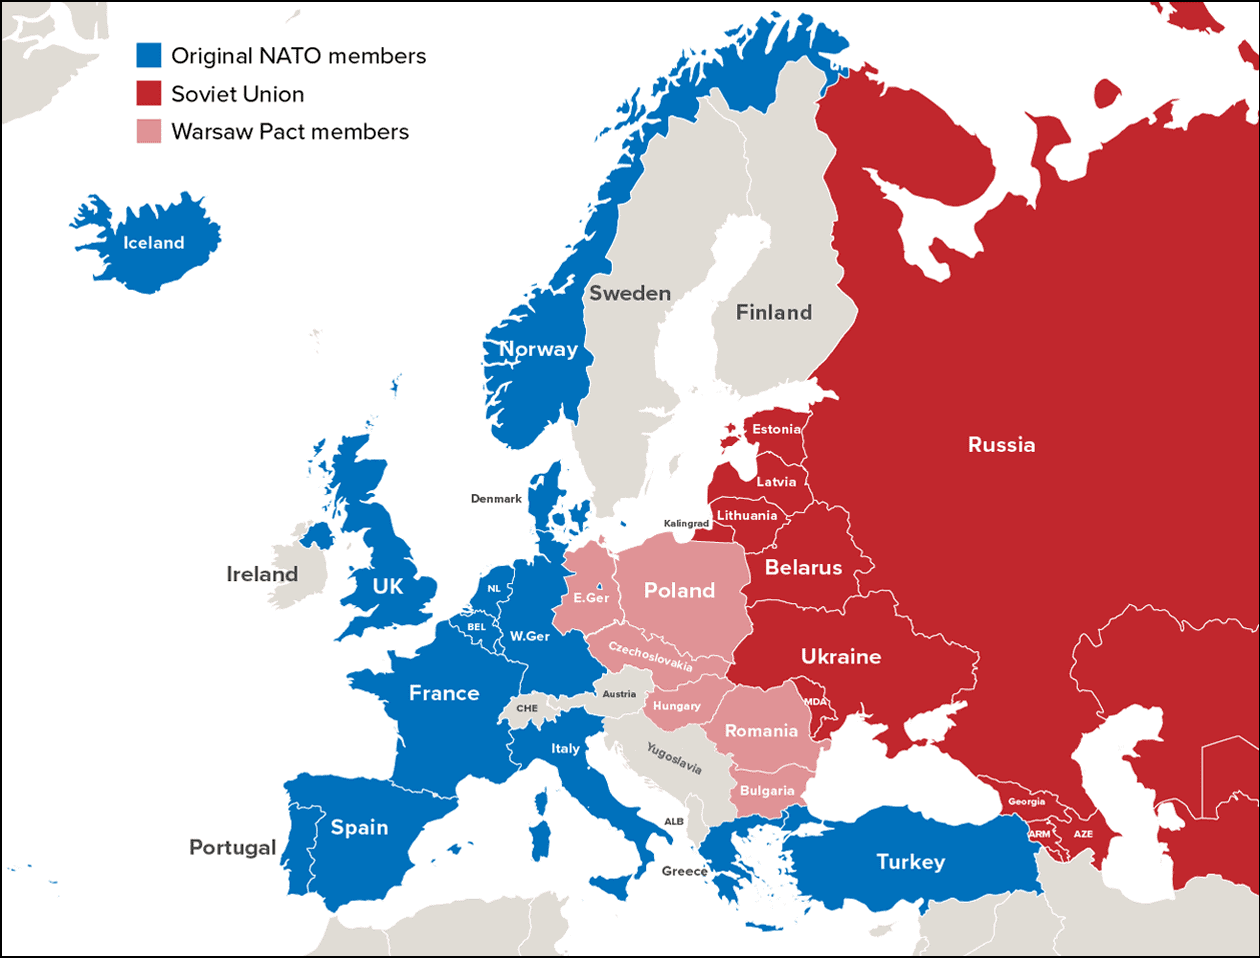 In 1990, the year after the Berlin Wall fell, Russia dominated the Soviet Union and six allied Warsaw Pact countries.